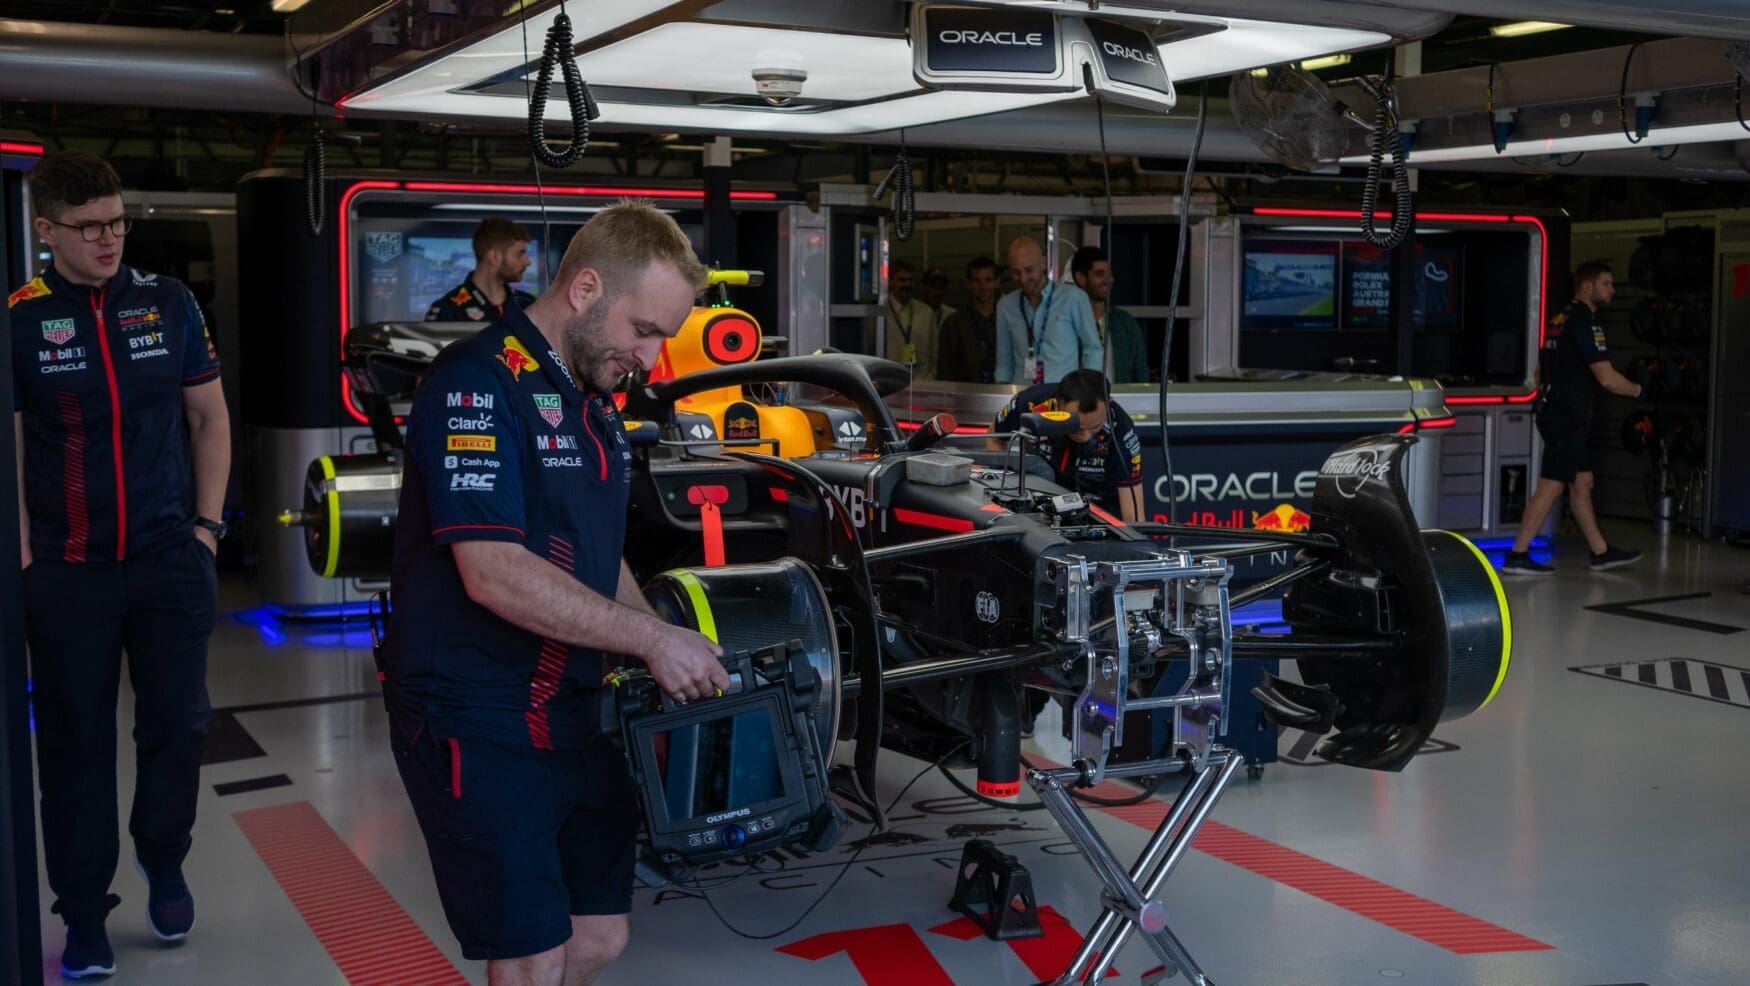 Australian Grand Prix – TAG Heuer affirms top watch sponsor spot with more Red Bull dominance, and I live out a childhood dream